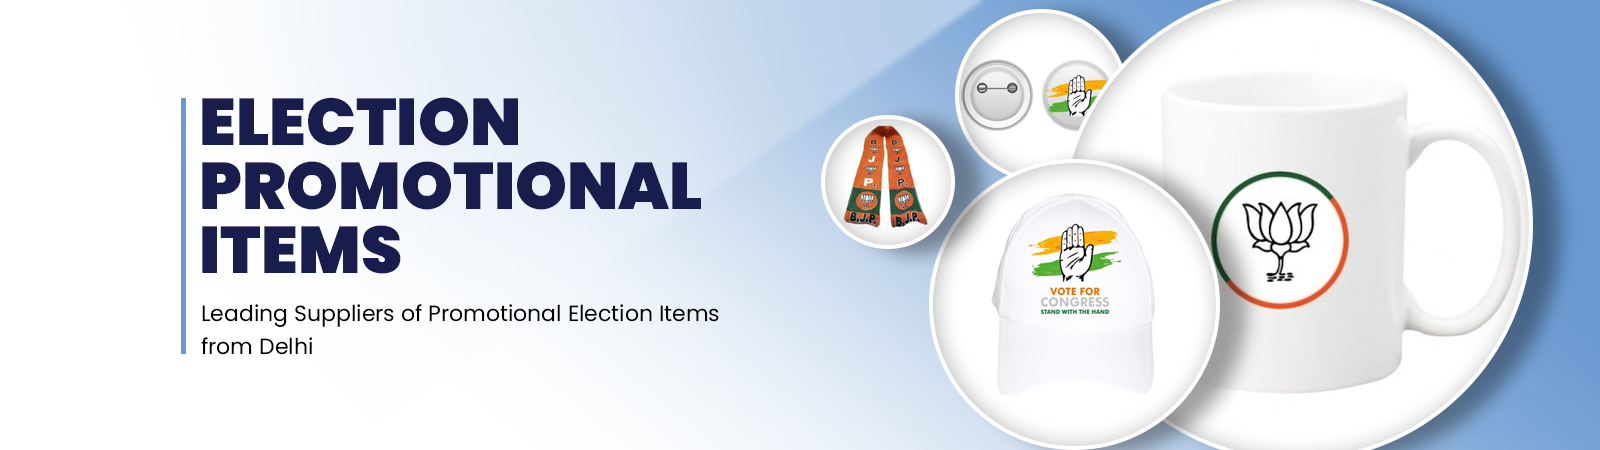 Election Promotional Items